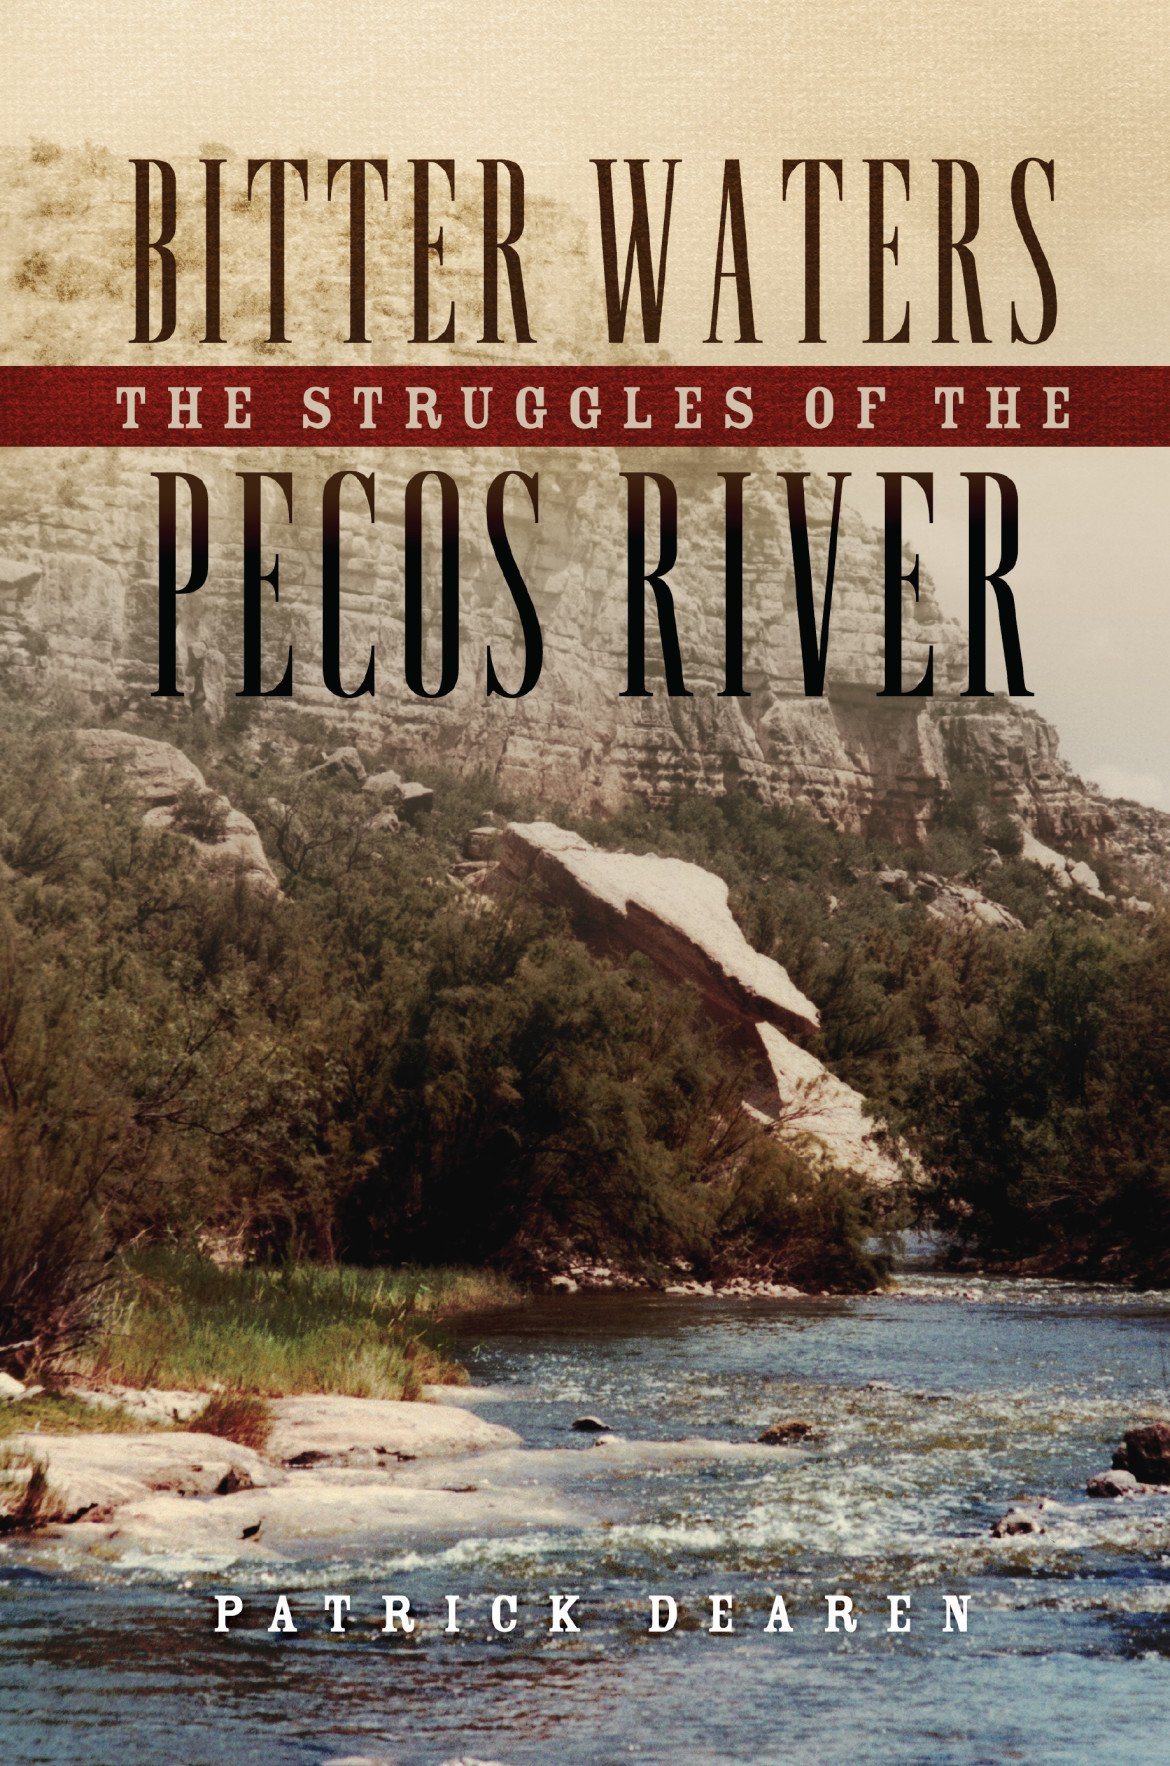 New book on the Pecos River, its place in history, and its future